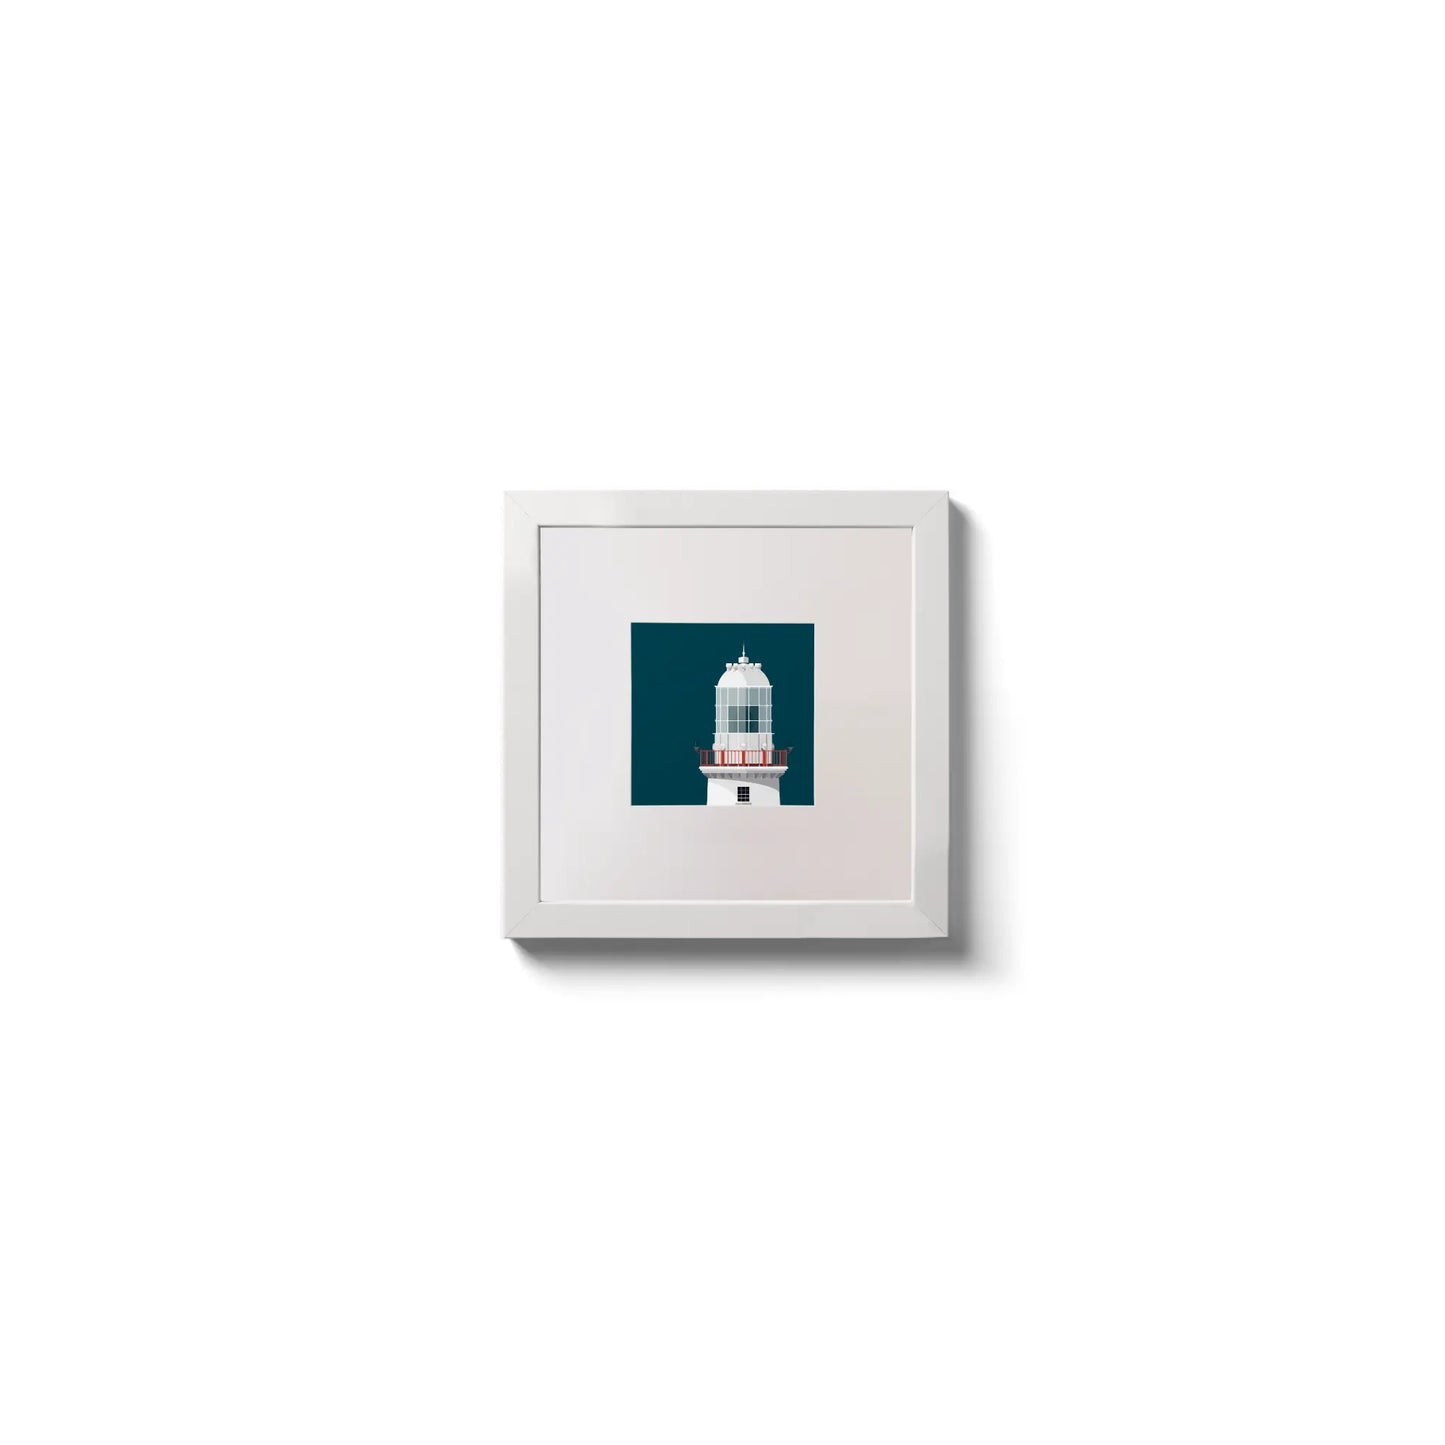 Illustration of Valentia Island lighthouse on a midnight blue background,  in a white square frame measuring 10x10cm.